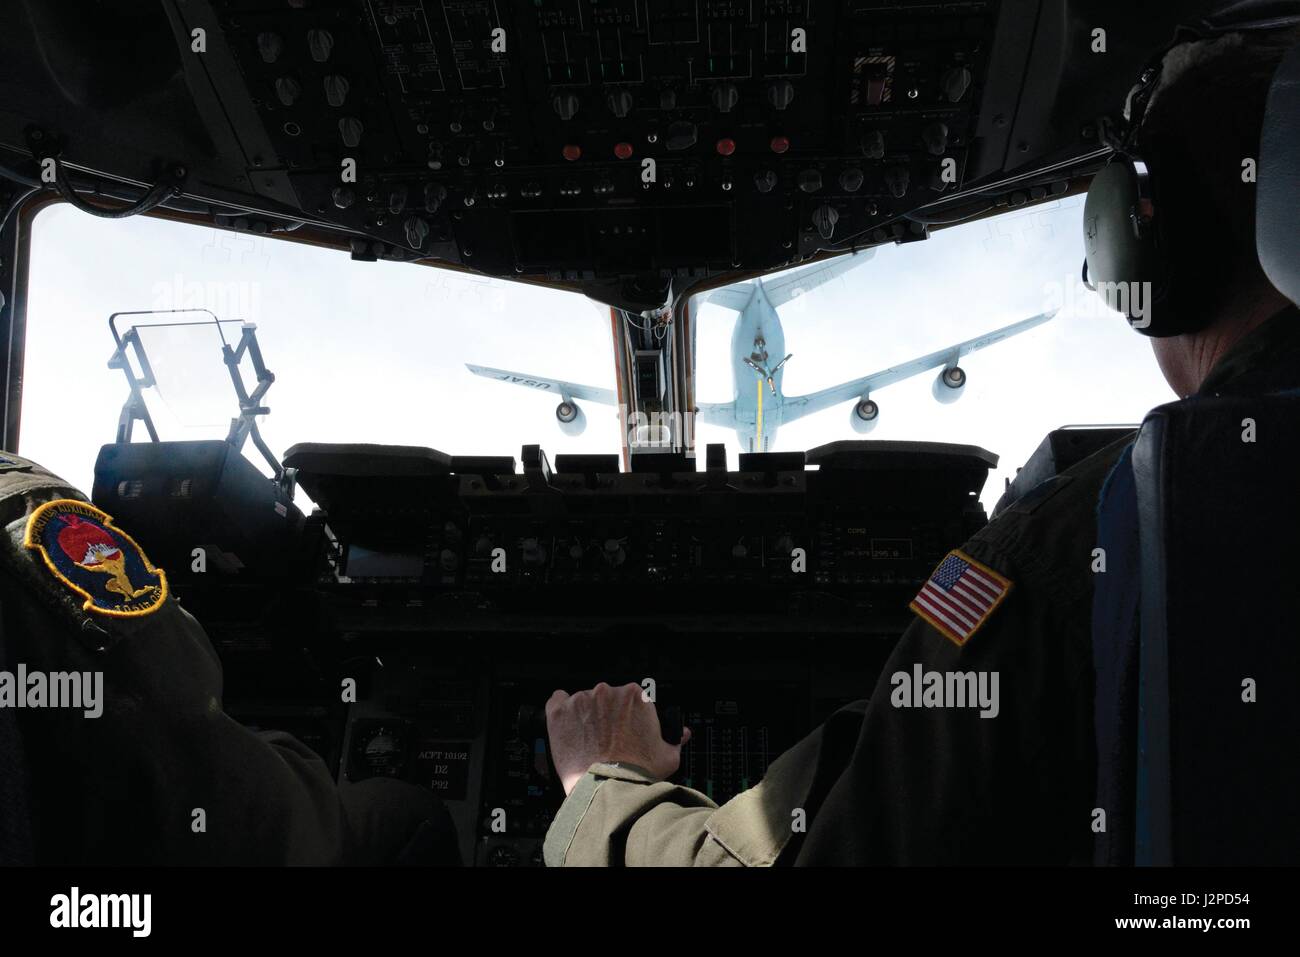 Lt. Col. Richard Carter, right, a pilot for the 105th Airlift Wing, maneuvers a C-17 Globemaster III aircraft during in-flight refueling of a C-17 Globemaster III based at the 105th Airlift Wing, Stewart Air National Guard Base, New York April 20, 2017. The training included included low-level, touch-and-go and aerial refueling practice. (U.S. Air Force photo by Master Sgt. Sara A. Pastorello) Stock Photo